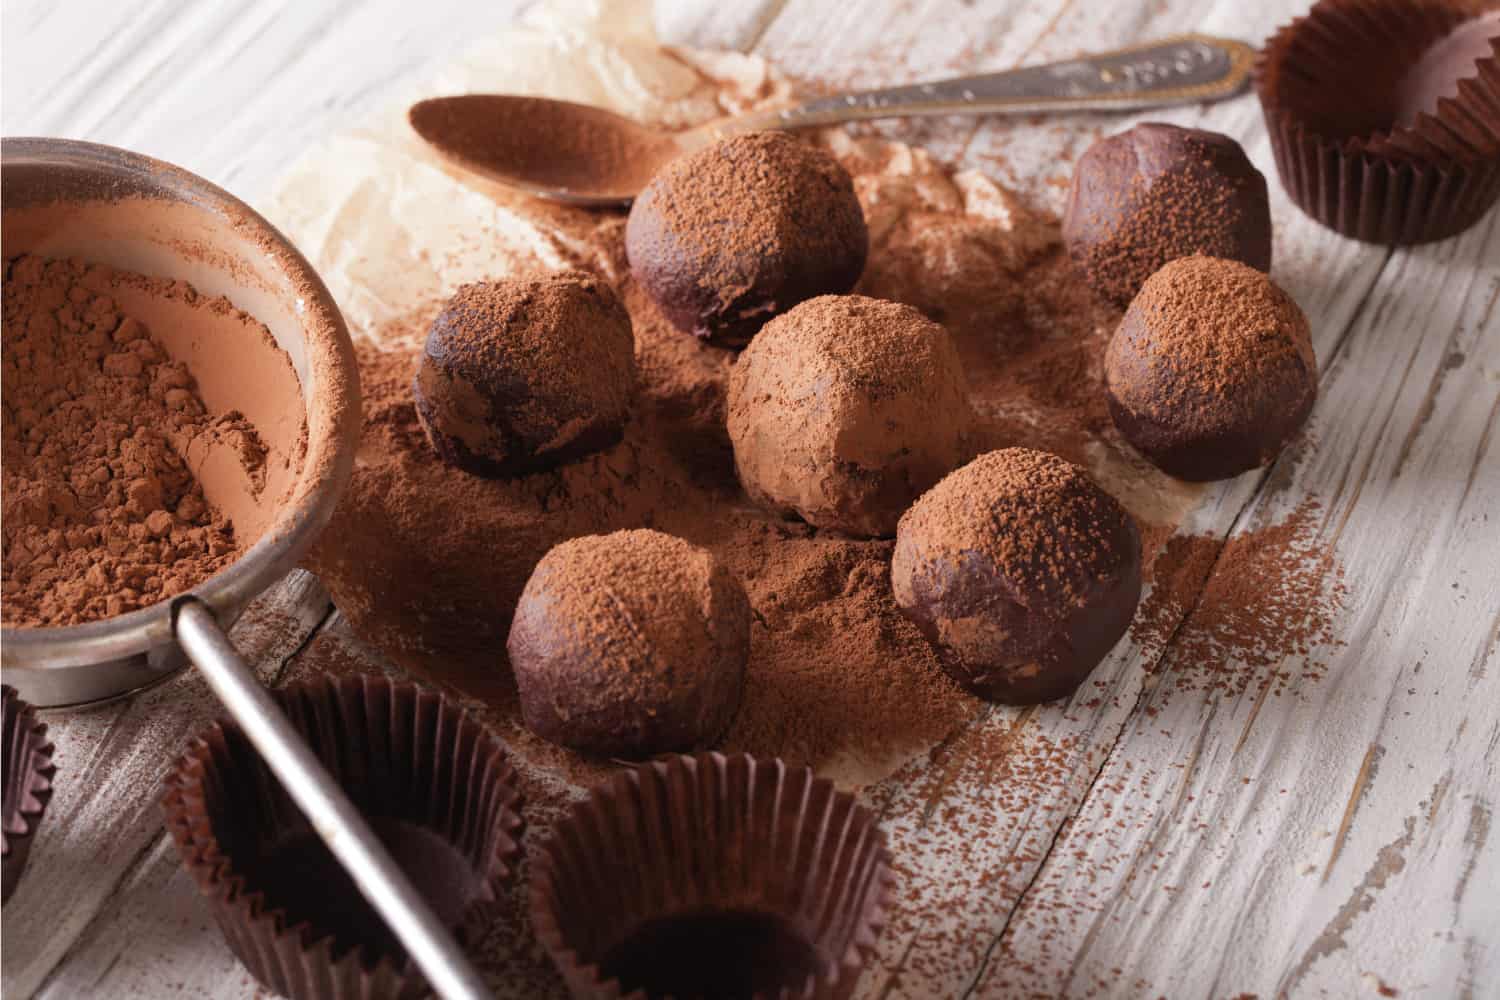 Chocolate truffles sprinkled with cocoa powder